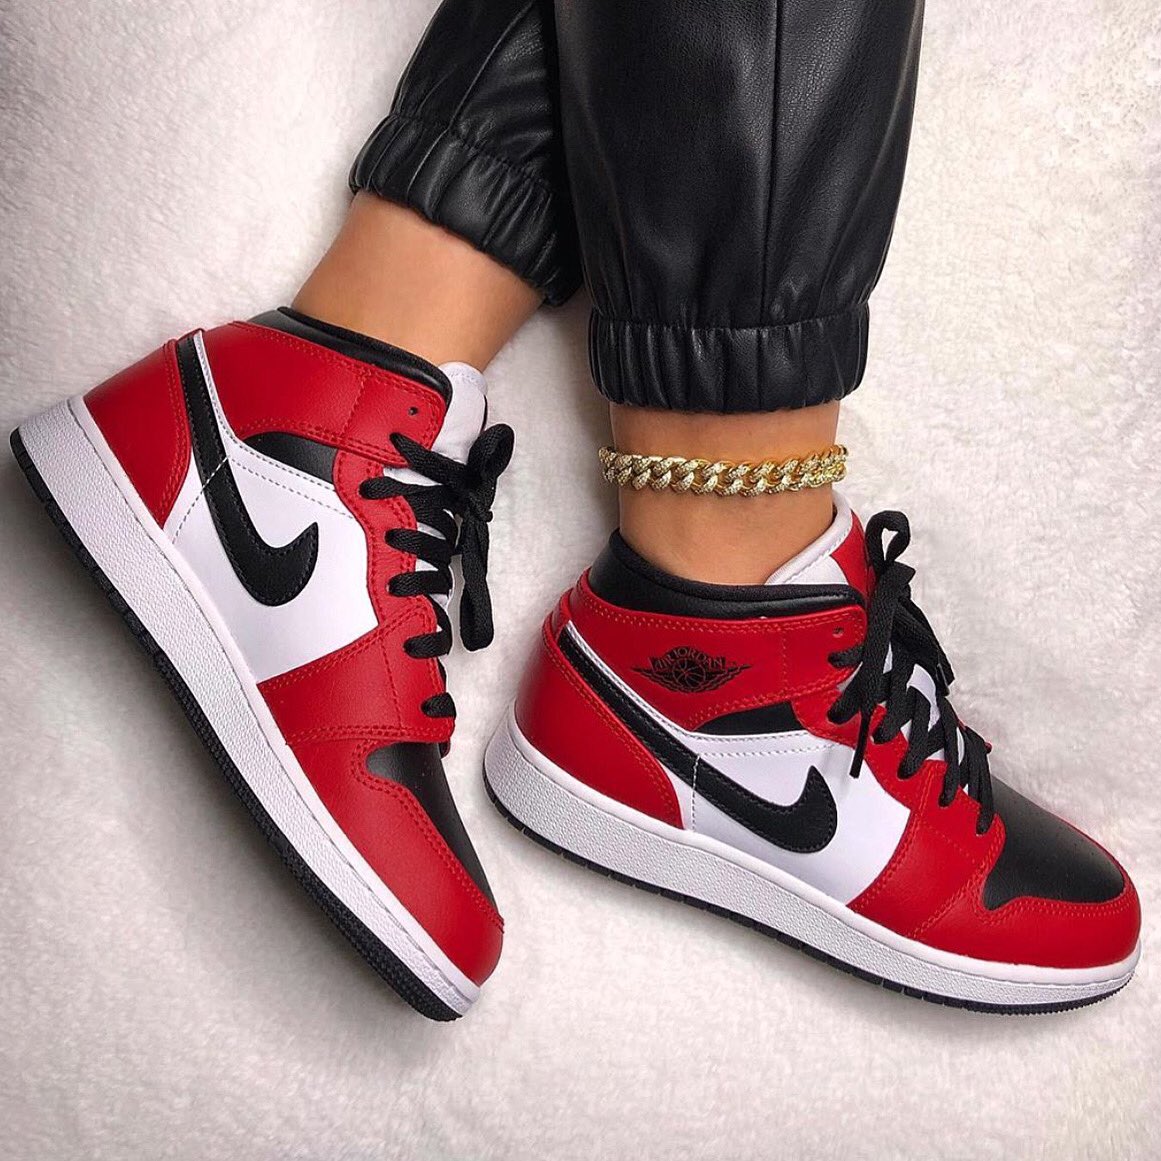 jordan 1 mid chicago toe outfit